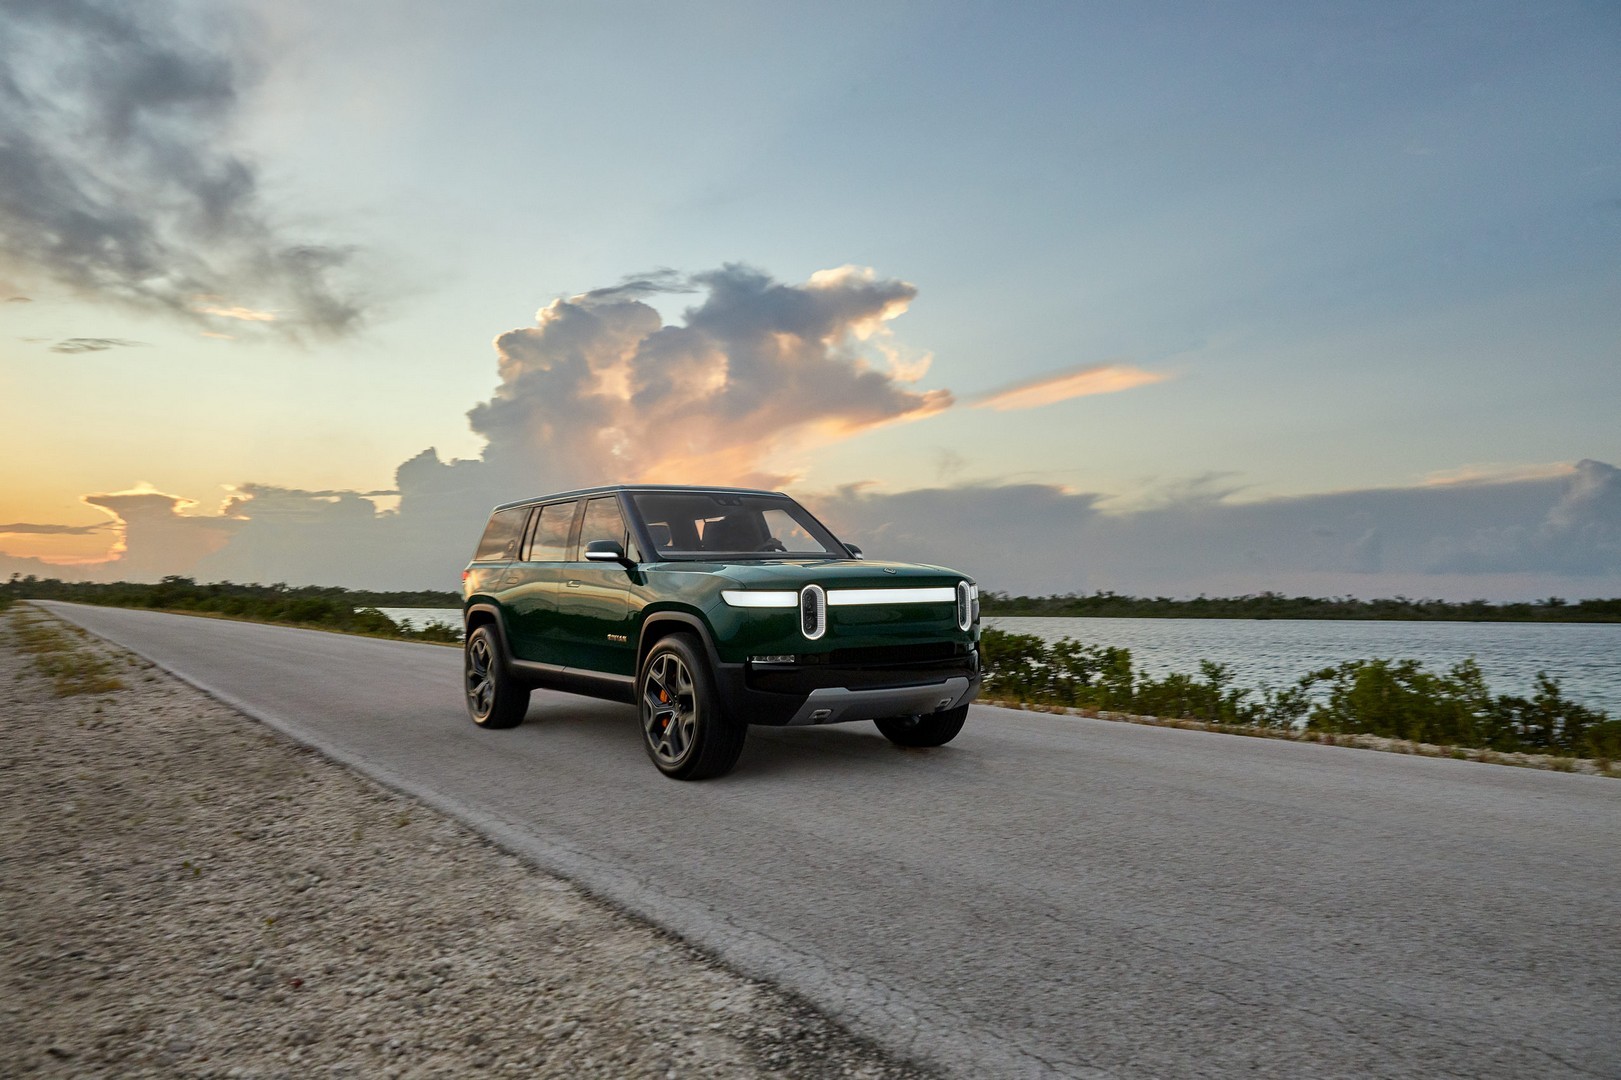 SevenSeat Rivian R1S Launch Edition Costs Just 2,500 More Than R1T